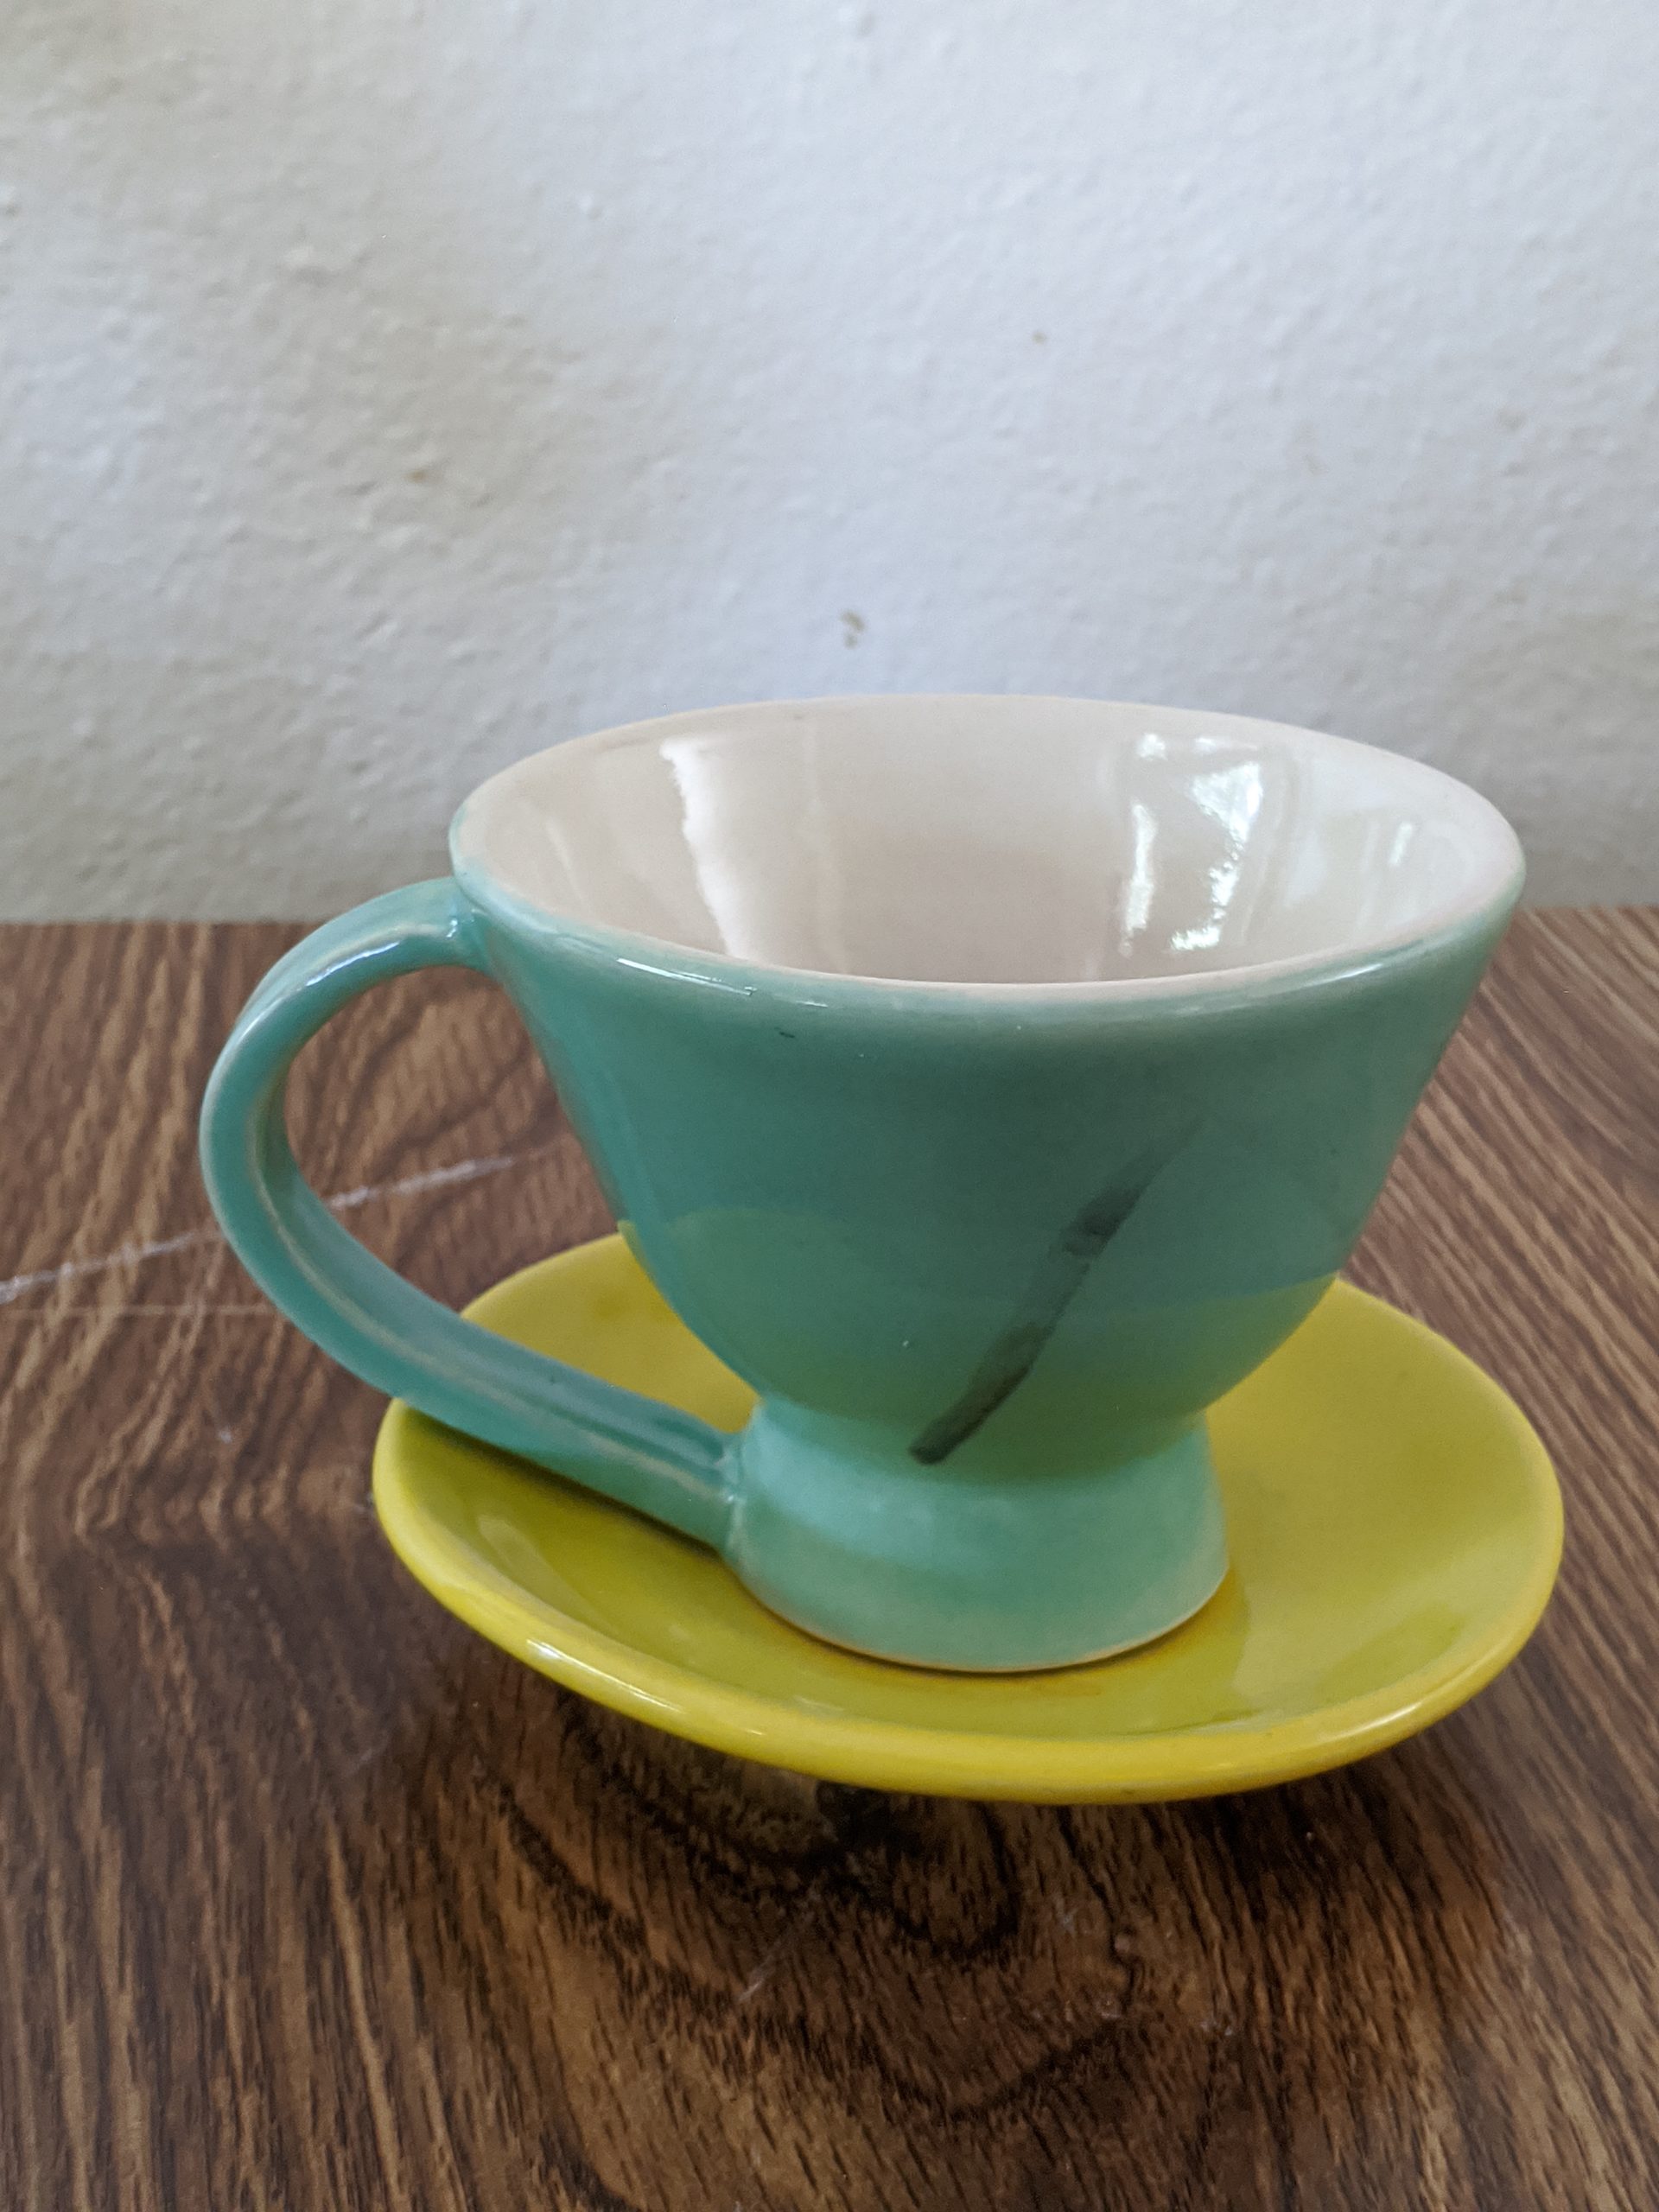 Teal Tea Cup by Neena Plant Pottery